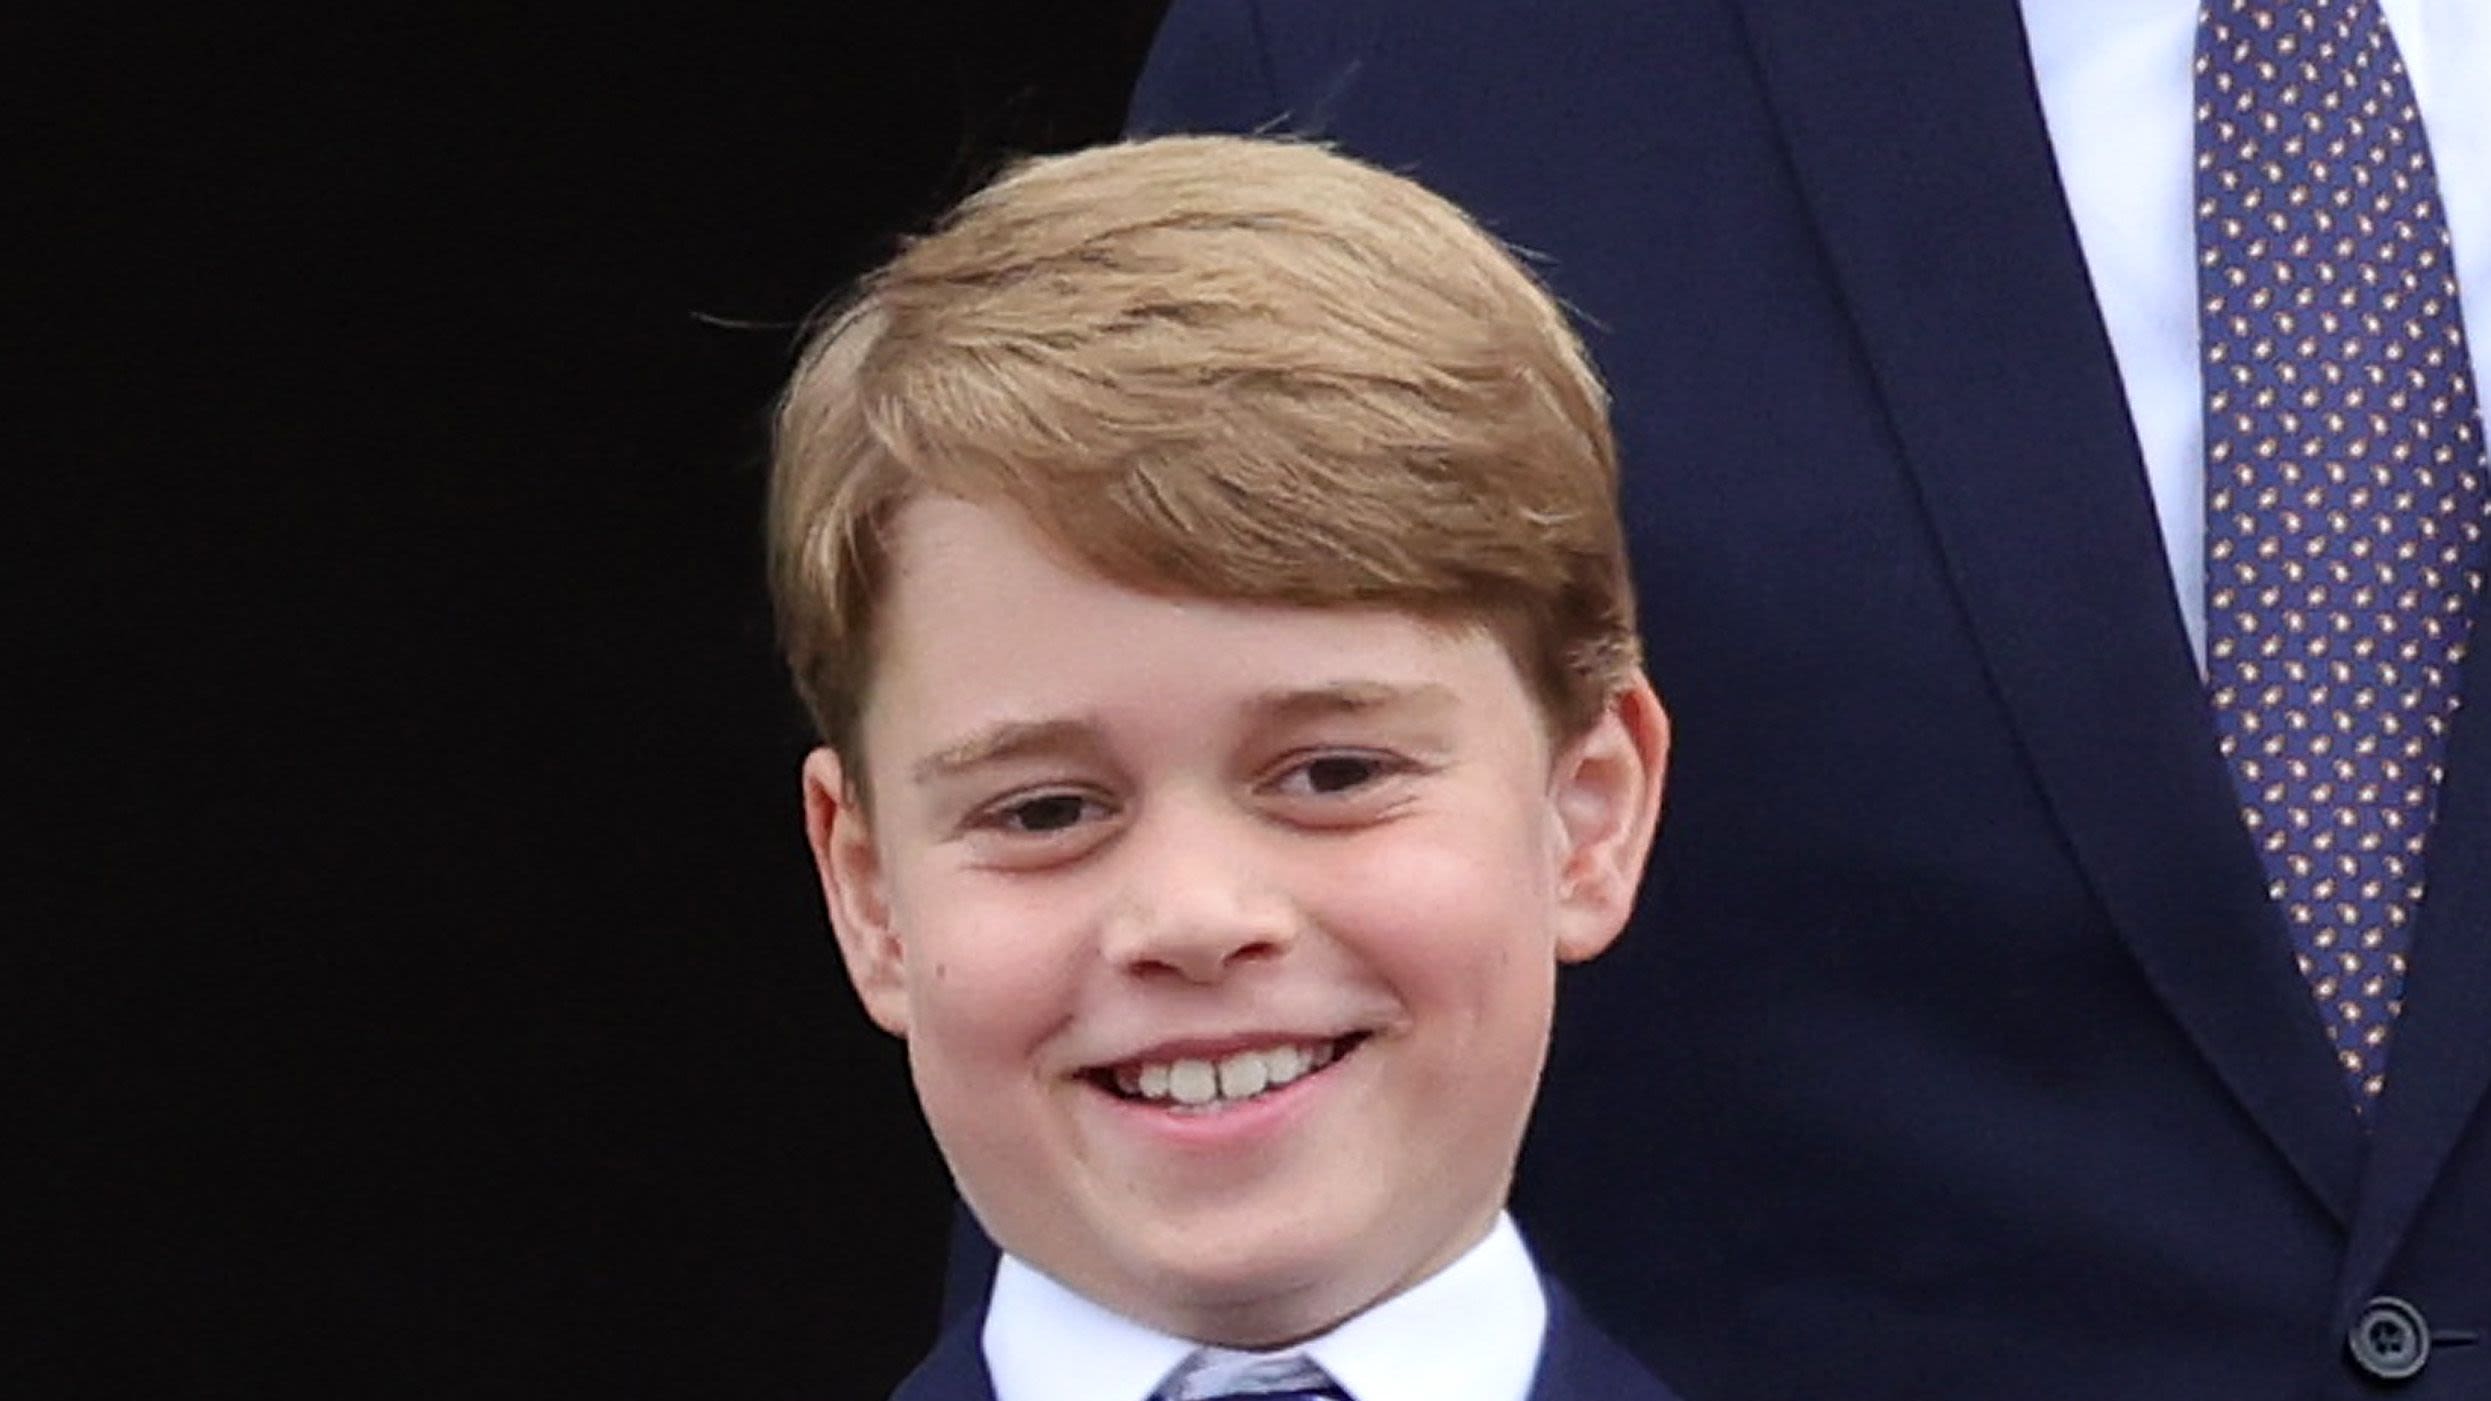 Prince George May Have to Follow Royal Travel Protocol After His 12th Birthday